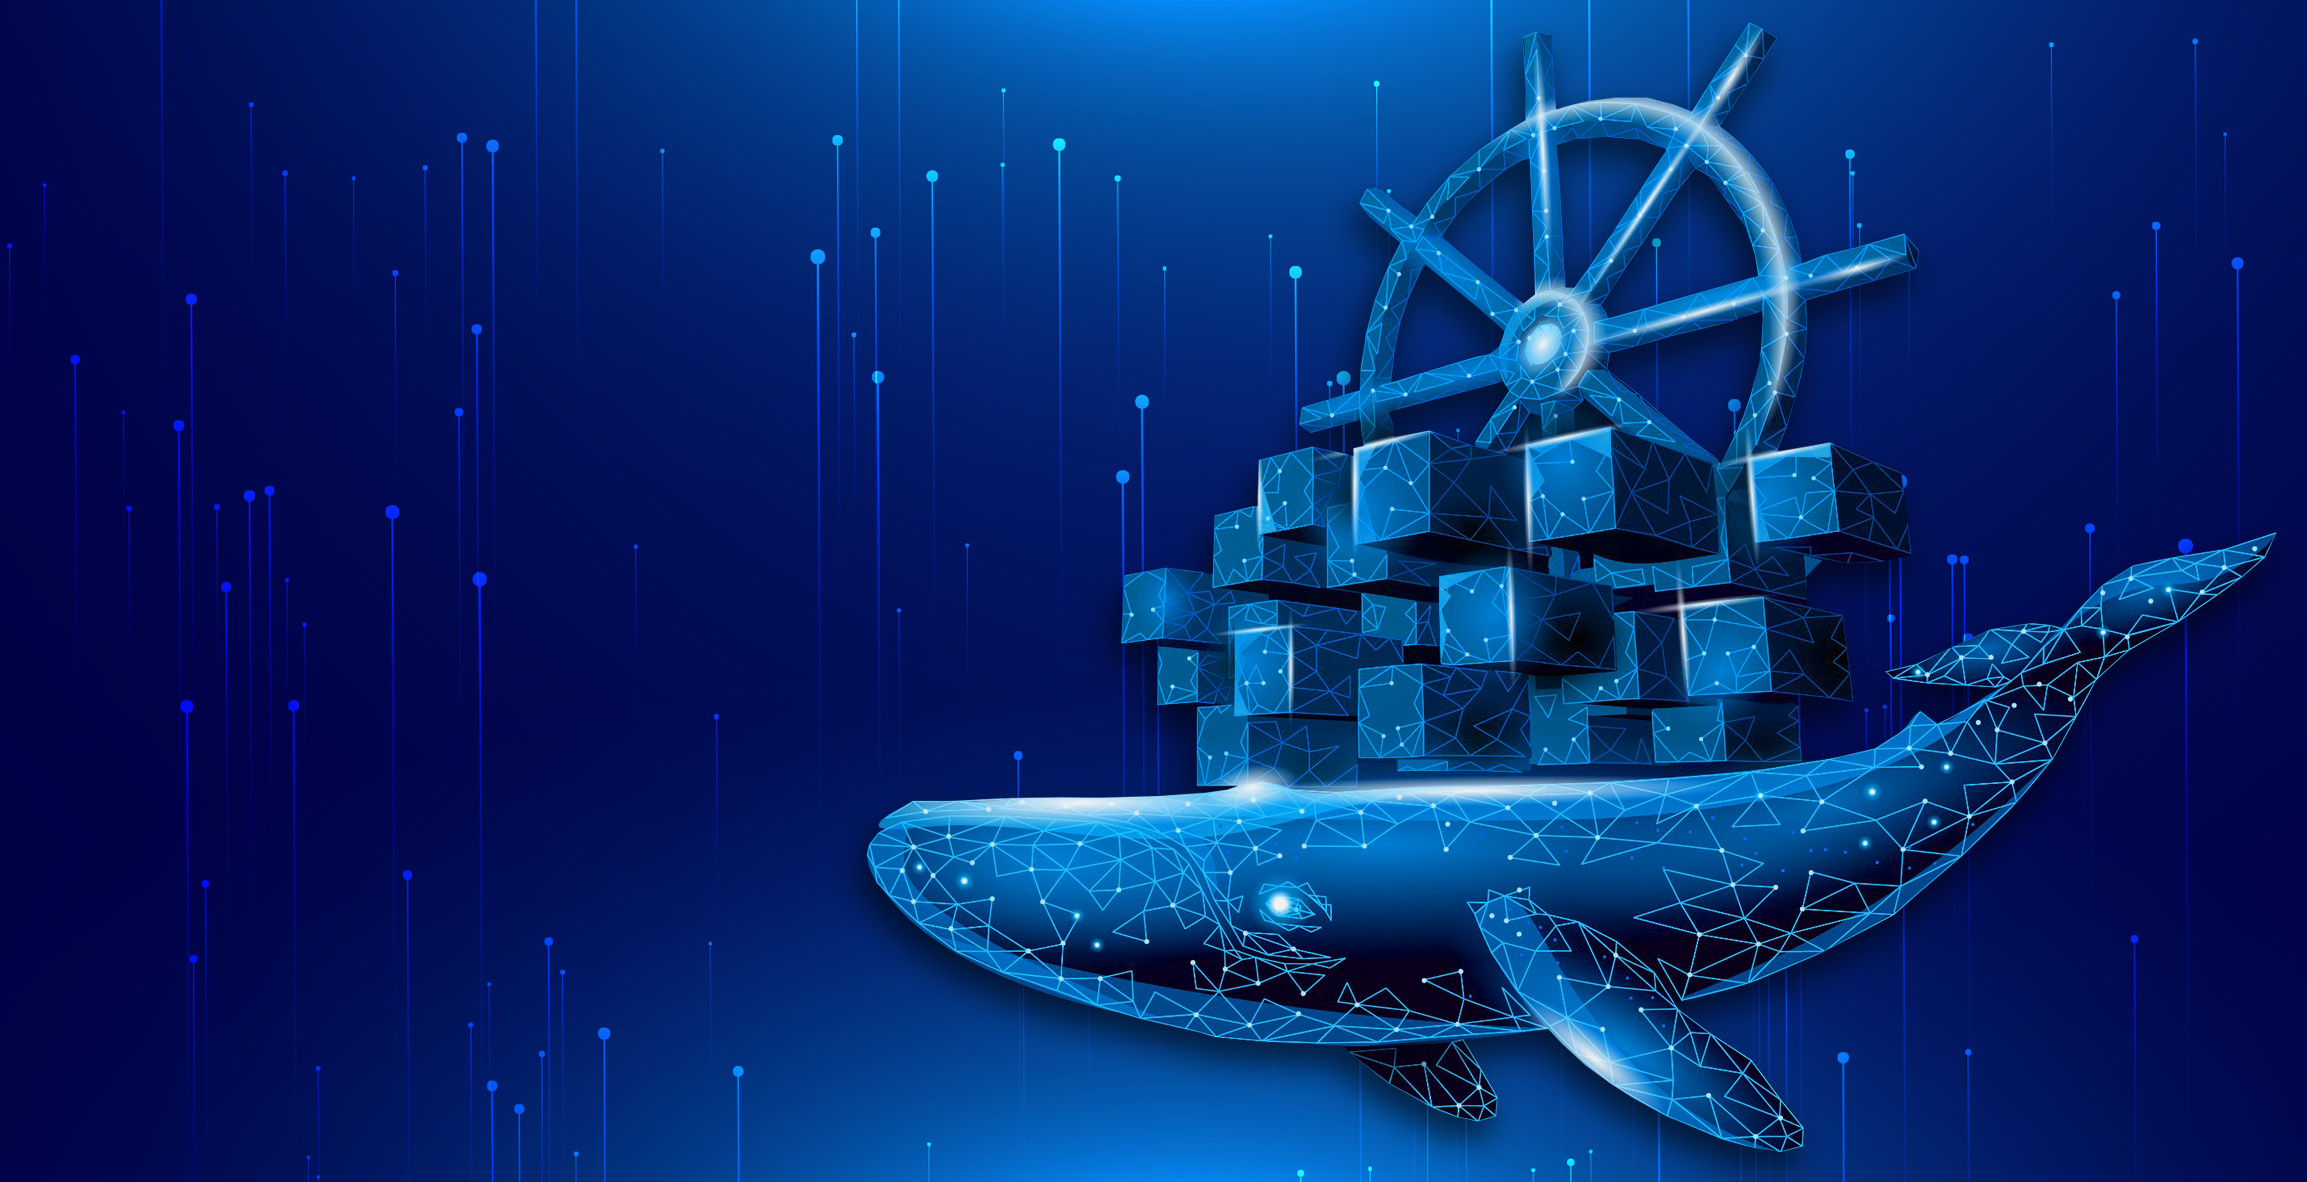 Enterprise IT in 2022: Docker Has Fallen, But Containers Will Rise